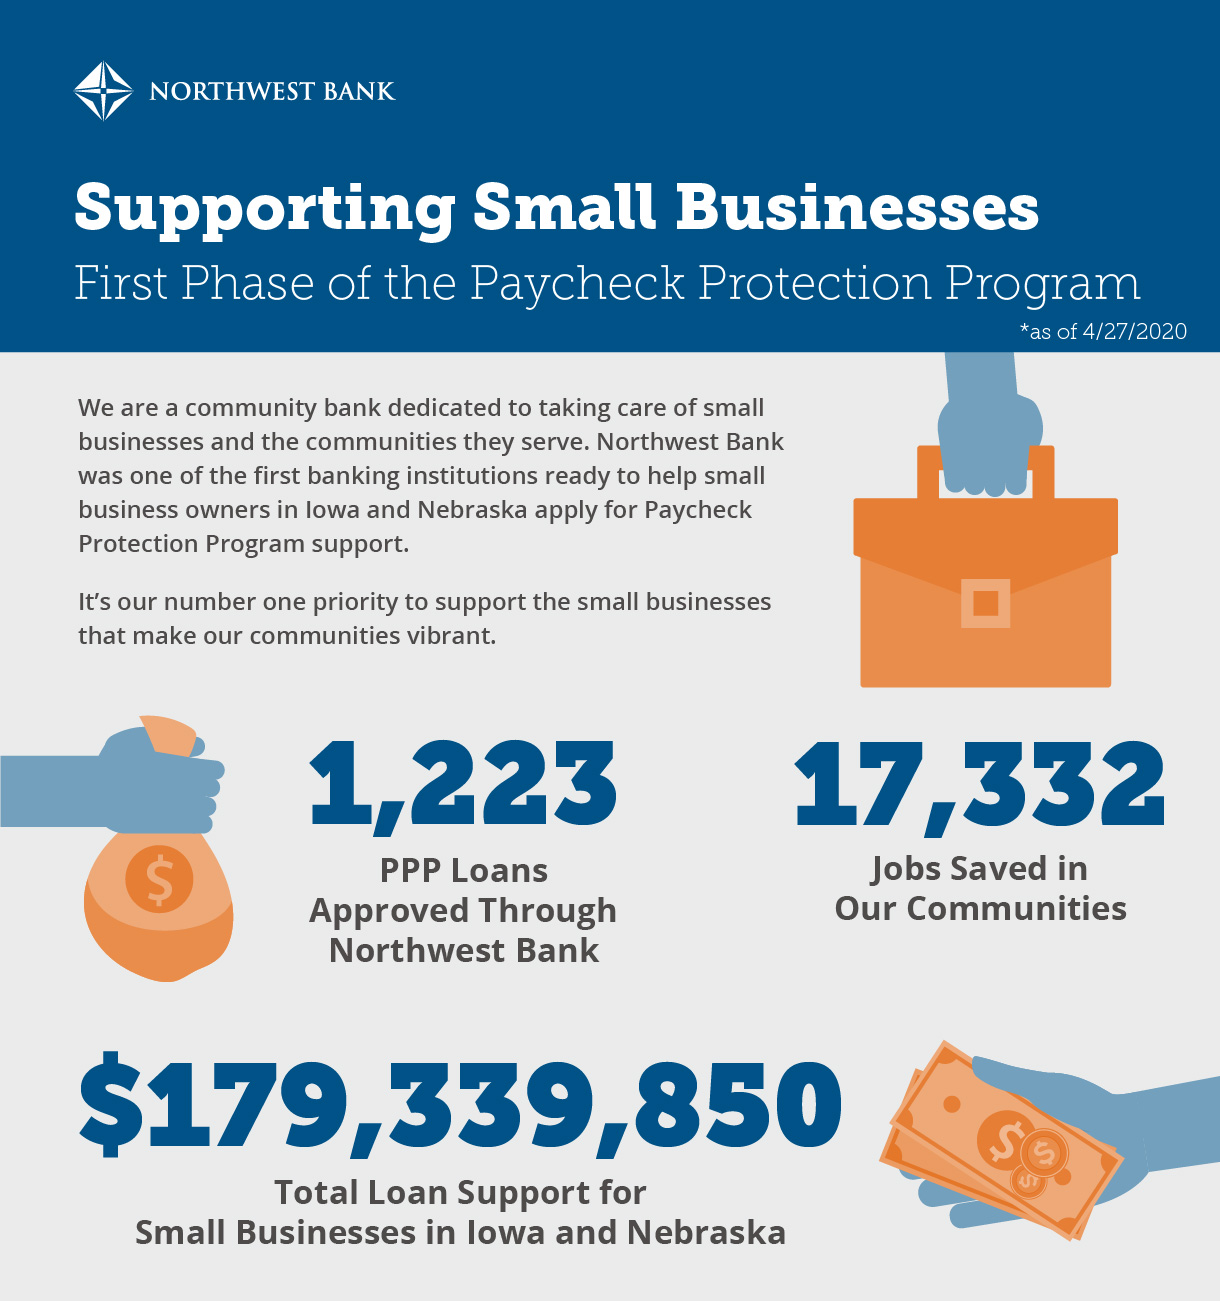 1,223 PPP Loans Approved through NB $179,339, 850 total loan support for small businesses in IA NE